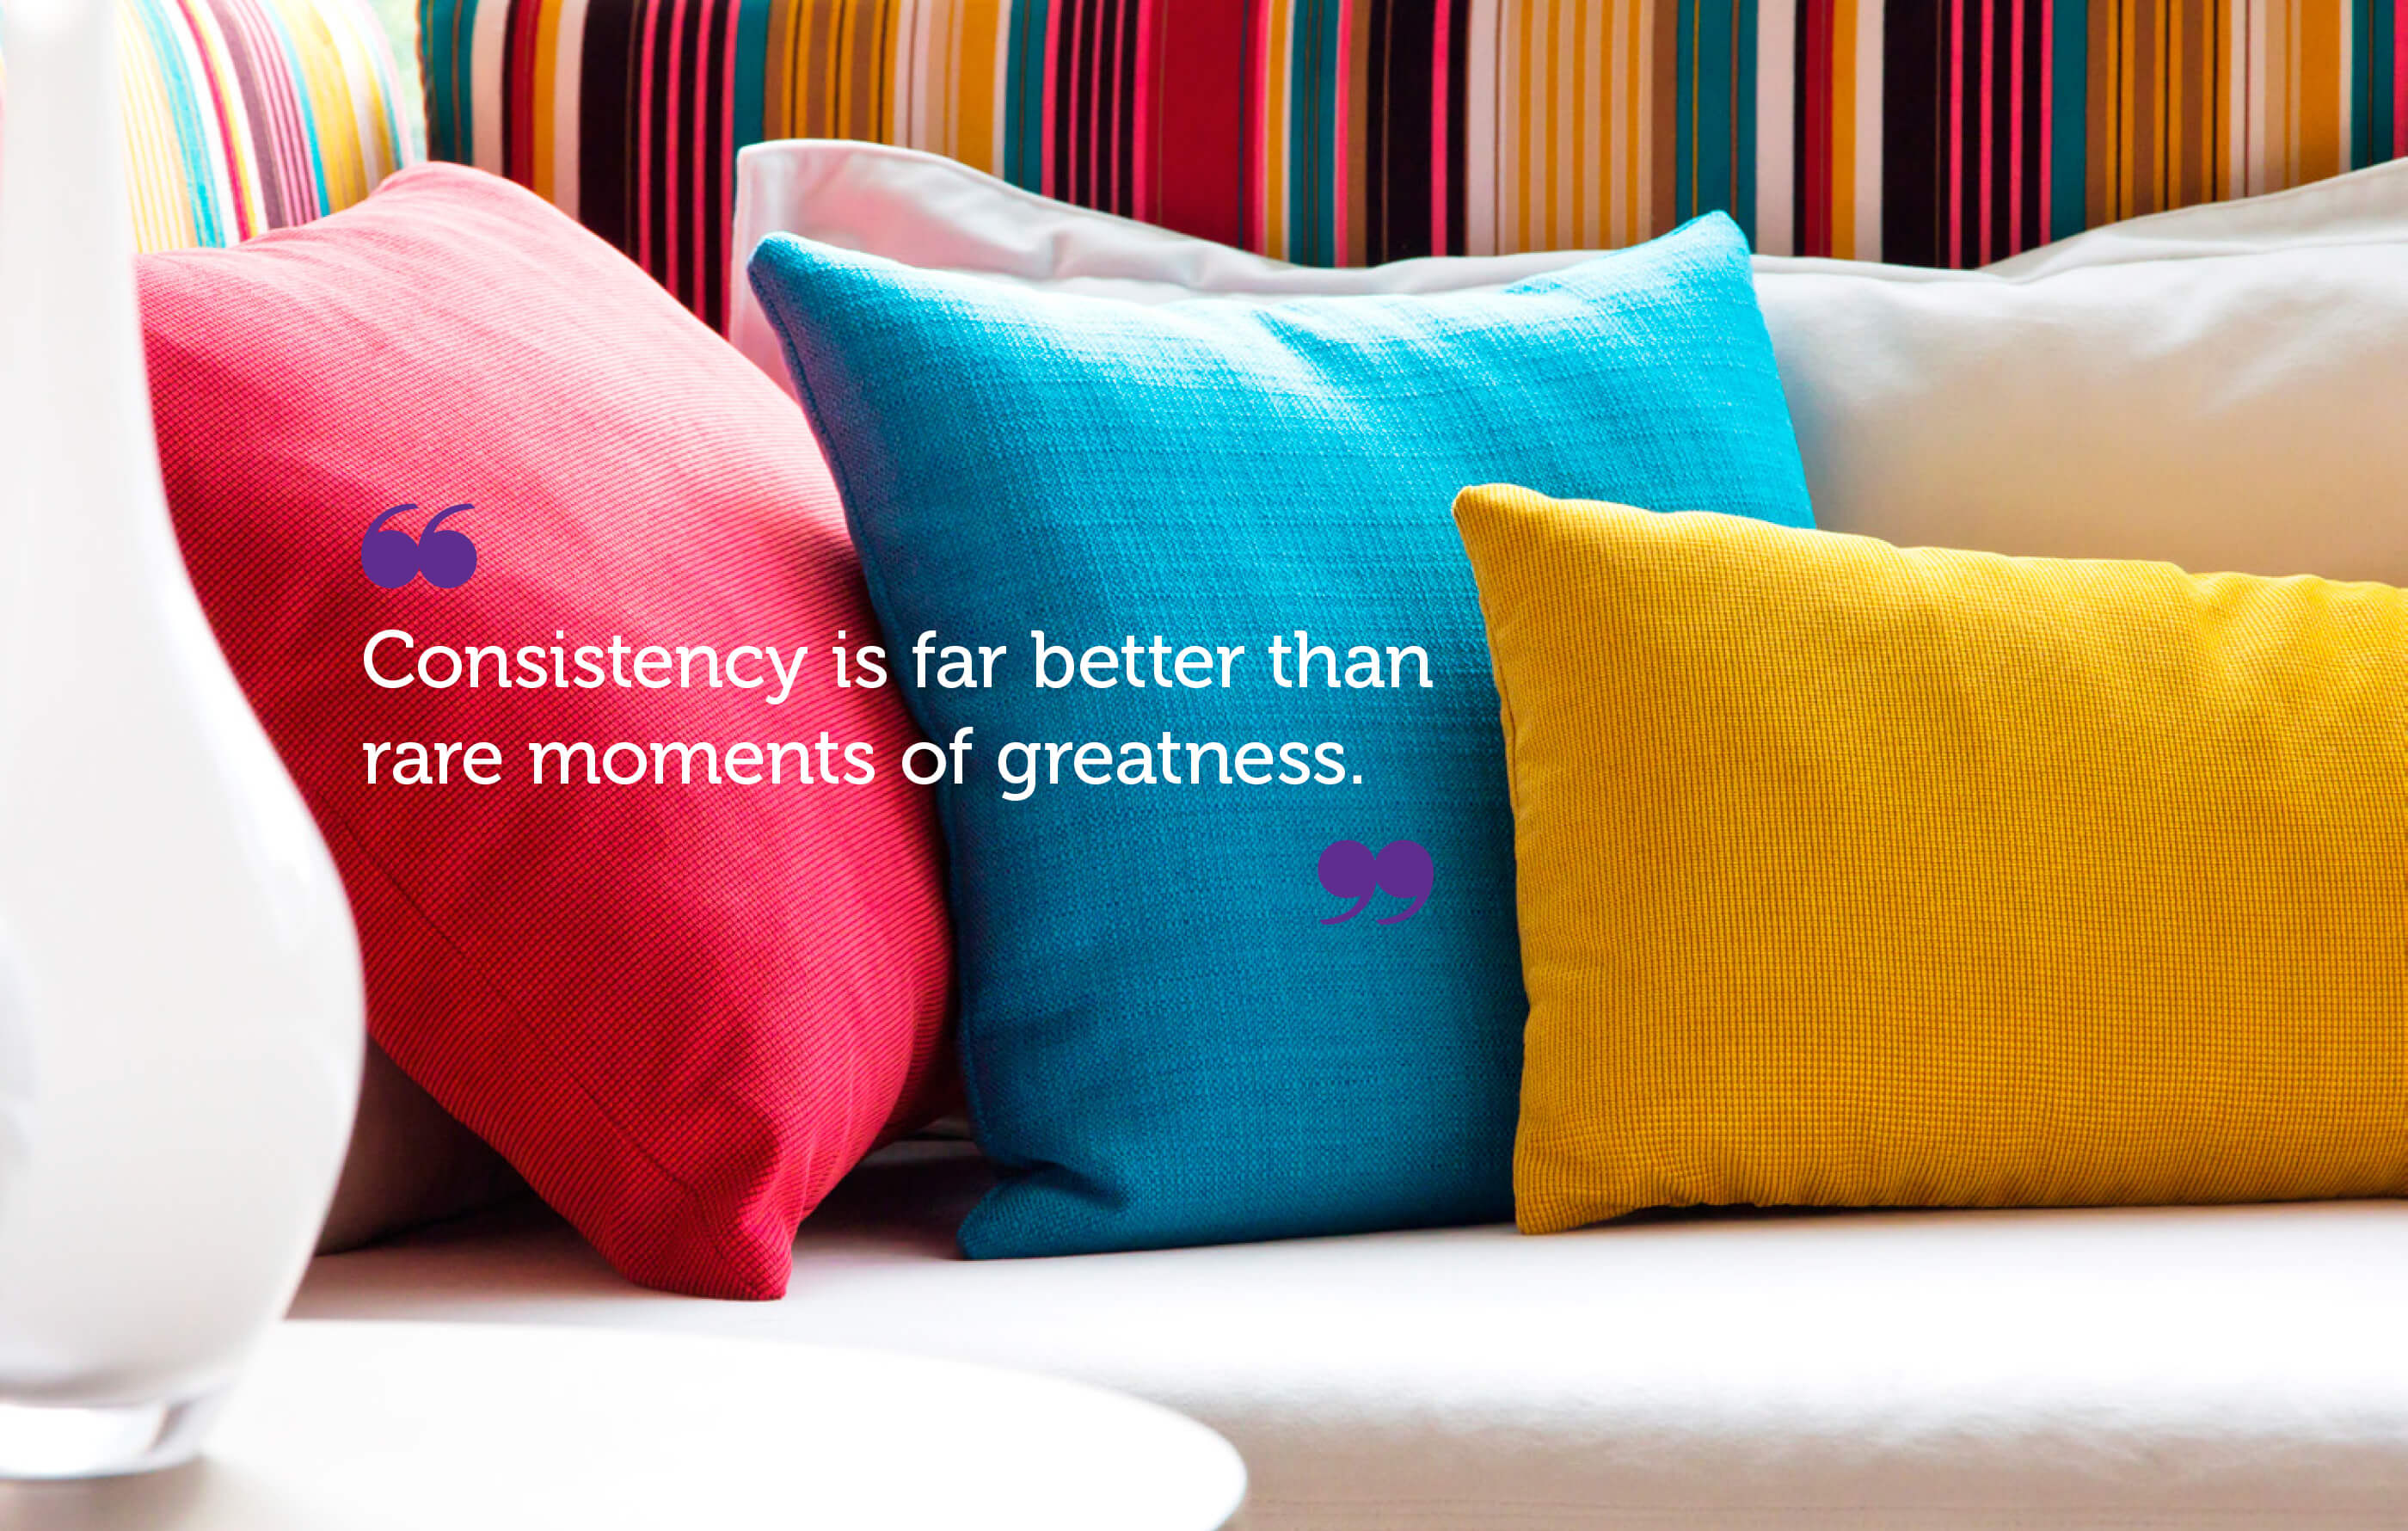 The tagline 'consistency is far better than rare moments of greatness' in white text with purple quote marks on an image of a DFS sofa